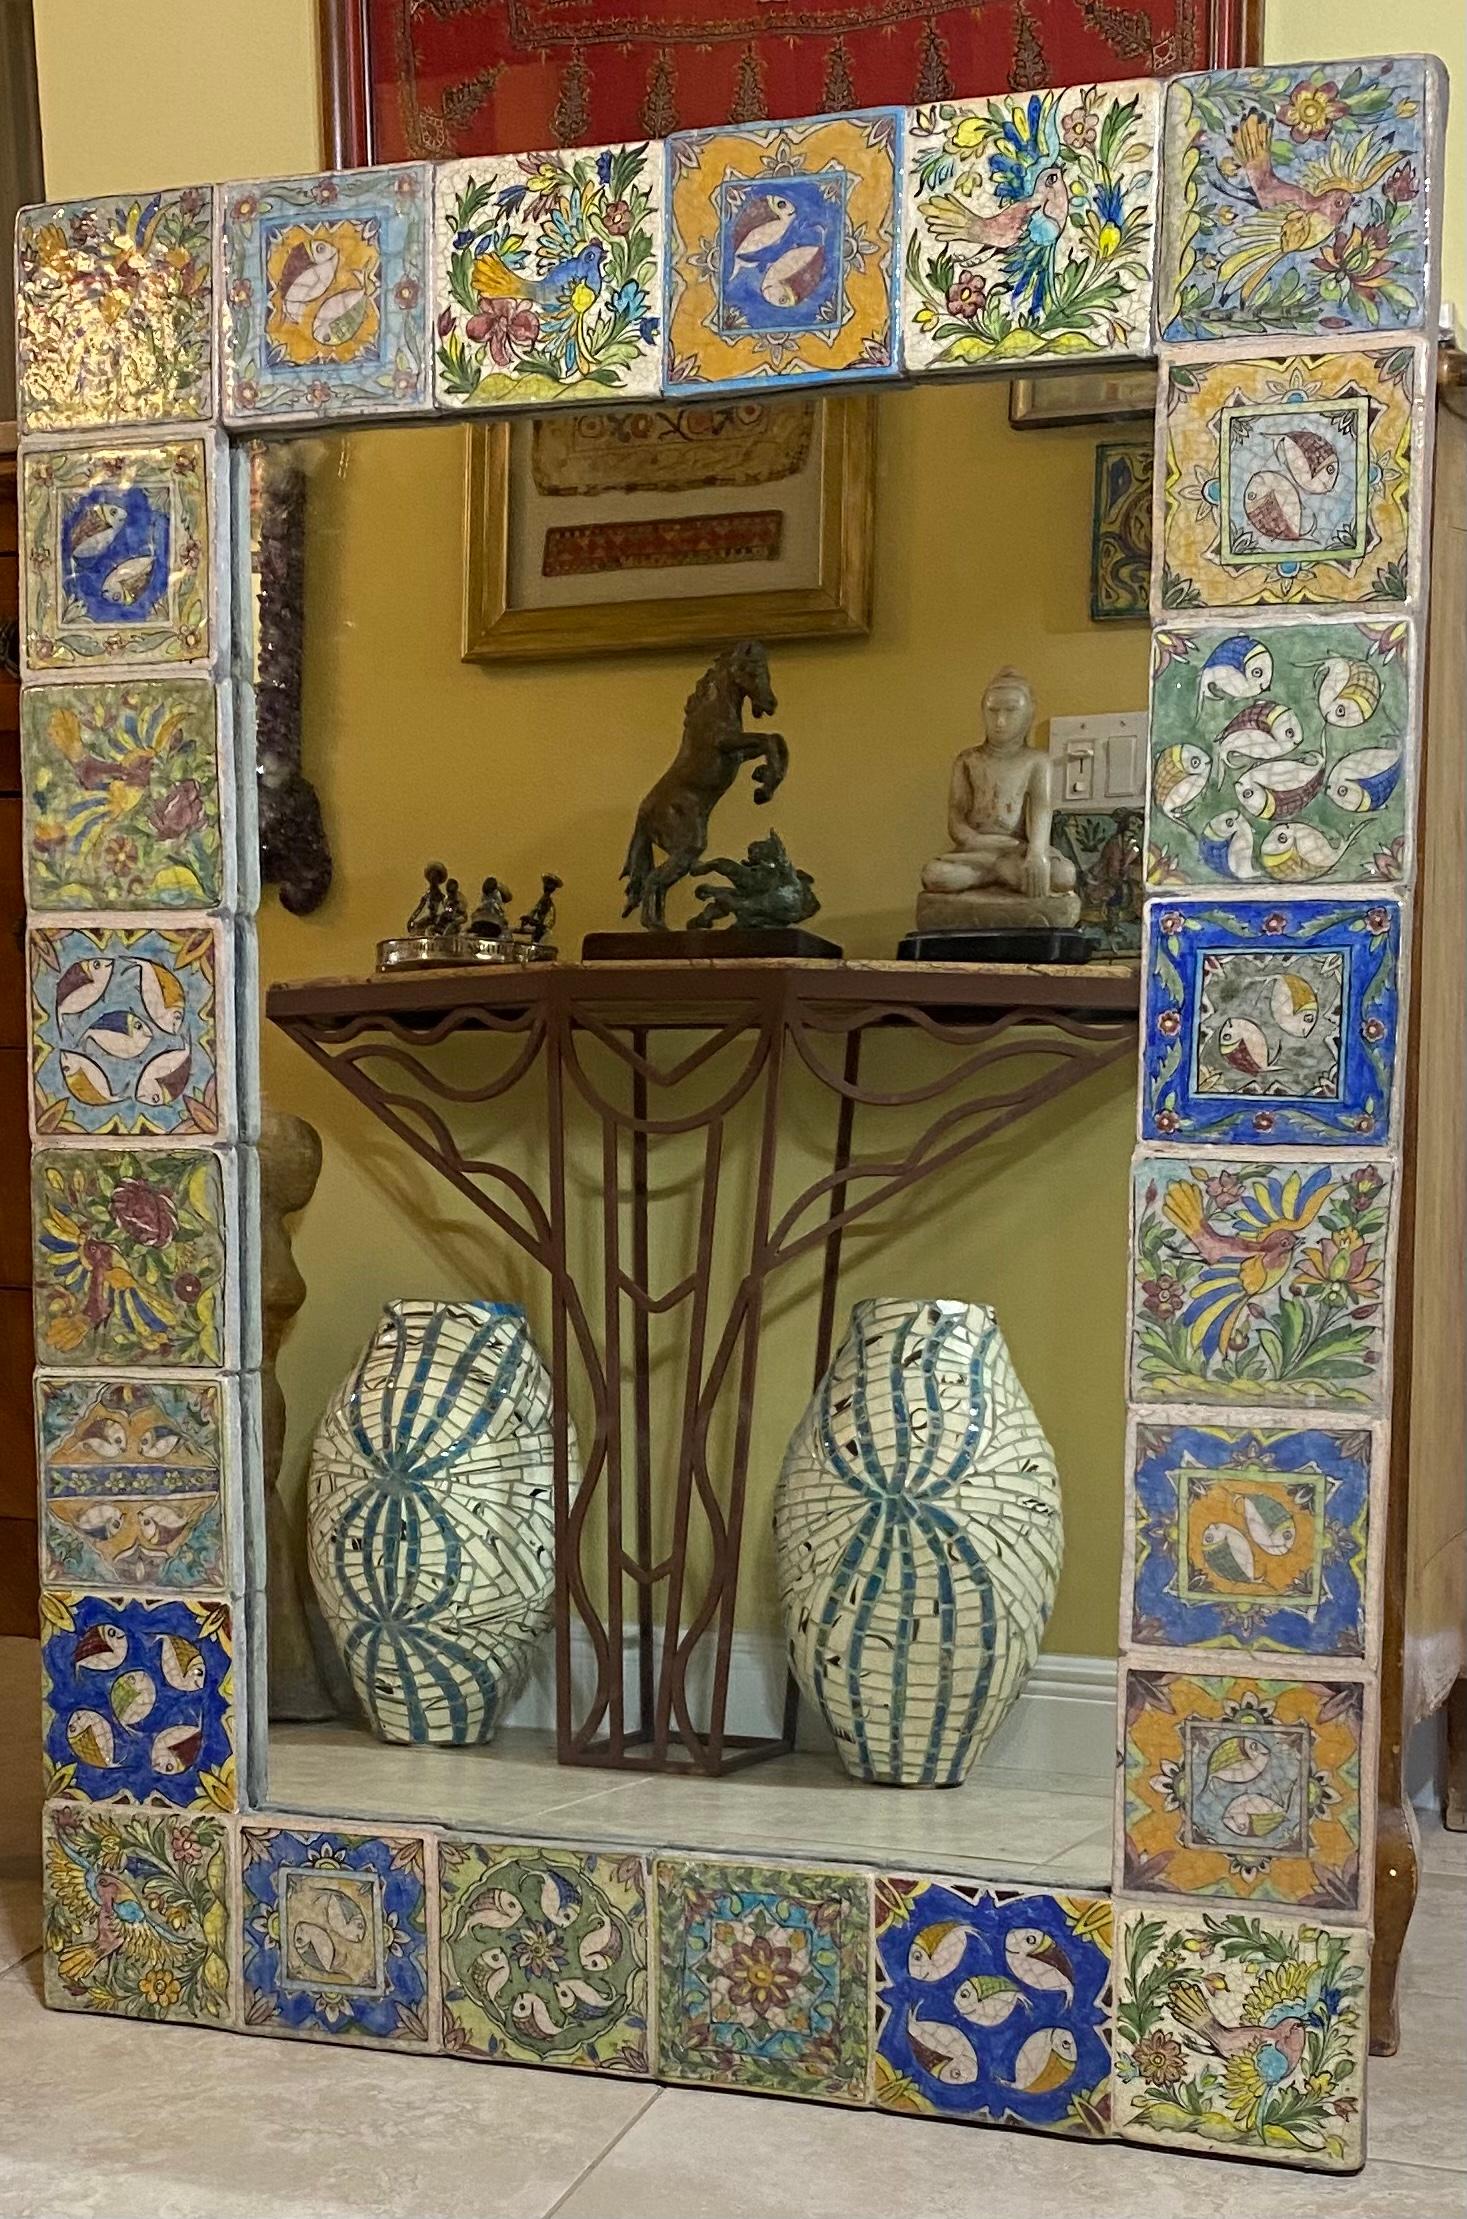 Beautiful large mirror made of hand-painted and glazed ceramic tiles, with exceptional motifs of vines flowers fish and birds. Great object of art for wall display.
Total weight : 60 pounds
Glass mirror size only :23” x 34”.
 